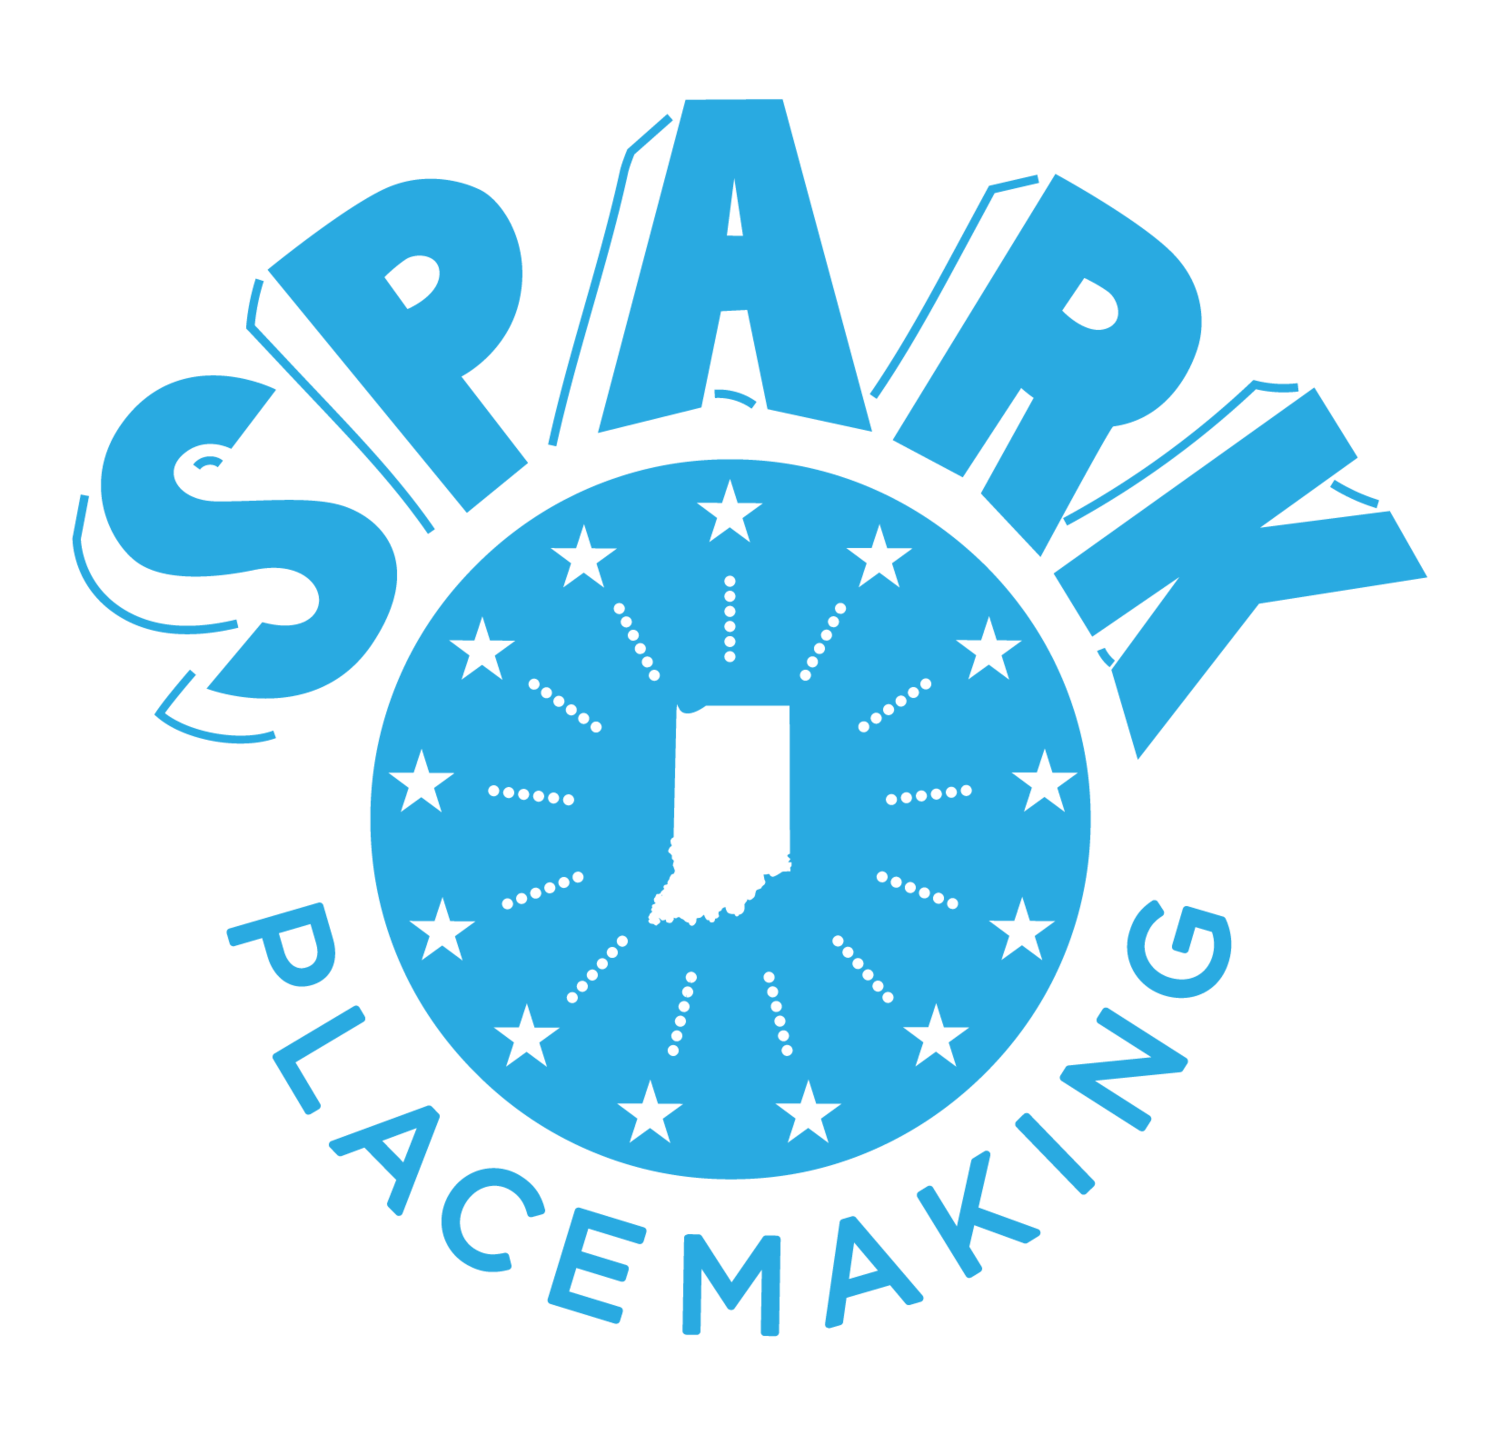 Spark Placemaking